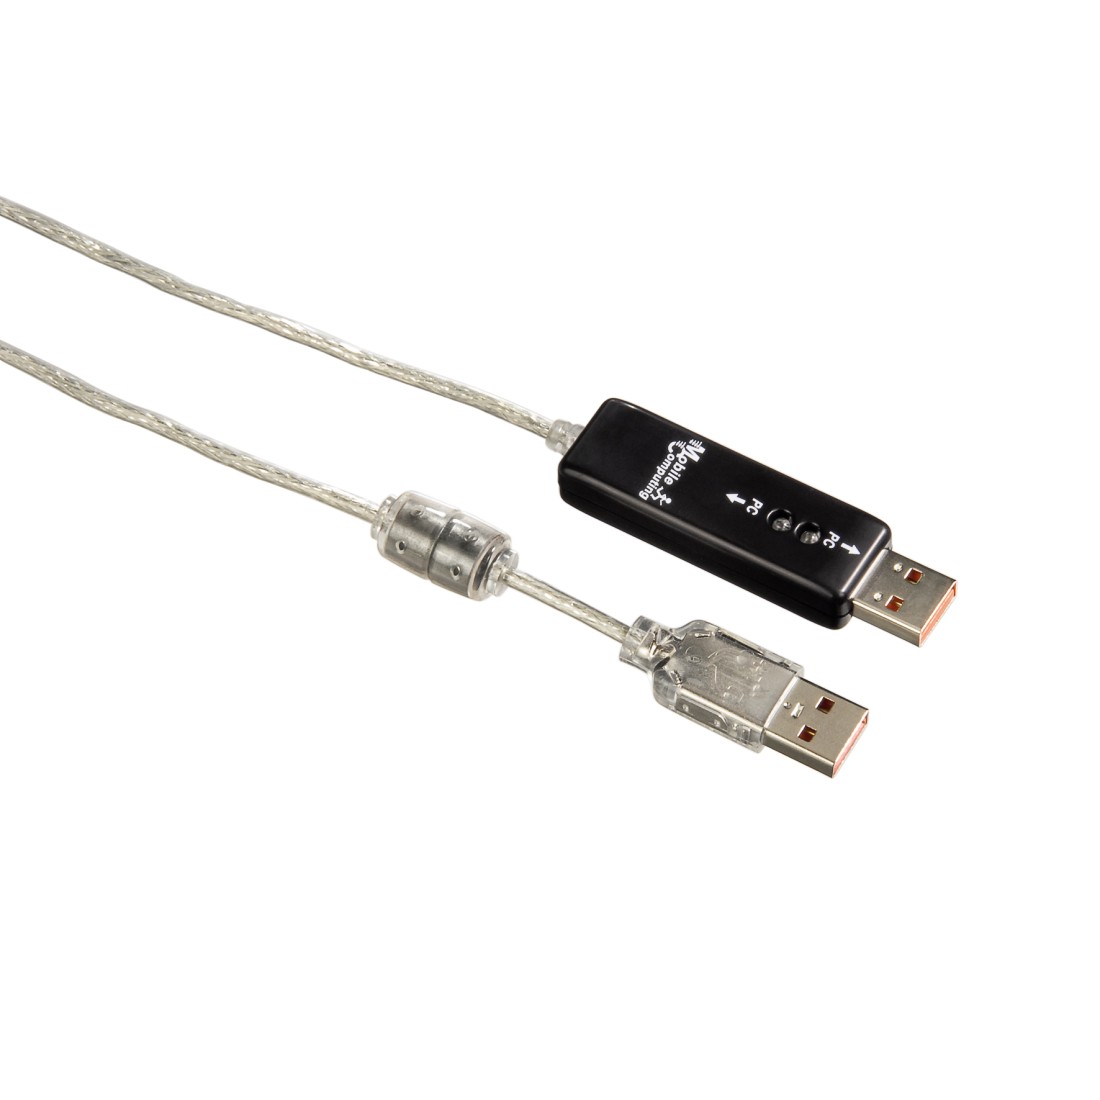 00049248 Hama USB 2.0 Link Cable for Windows